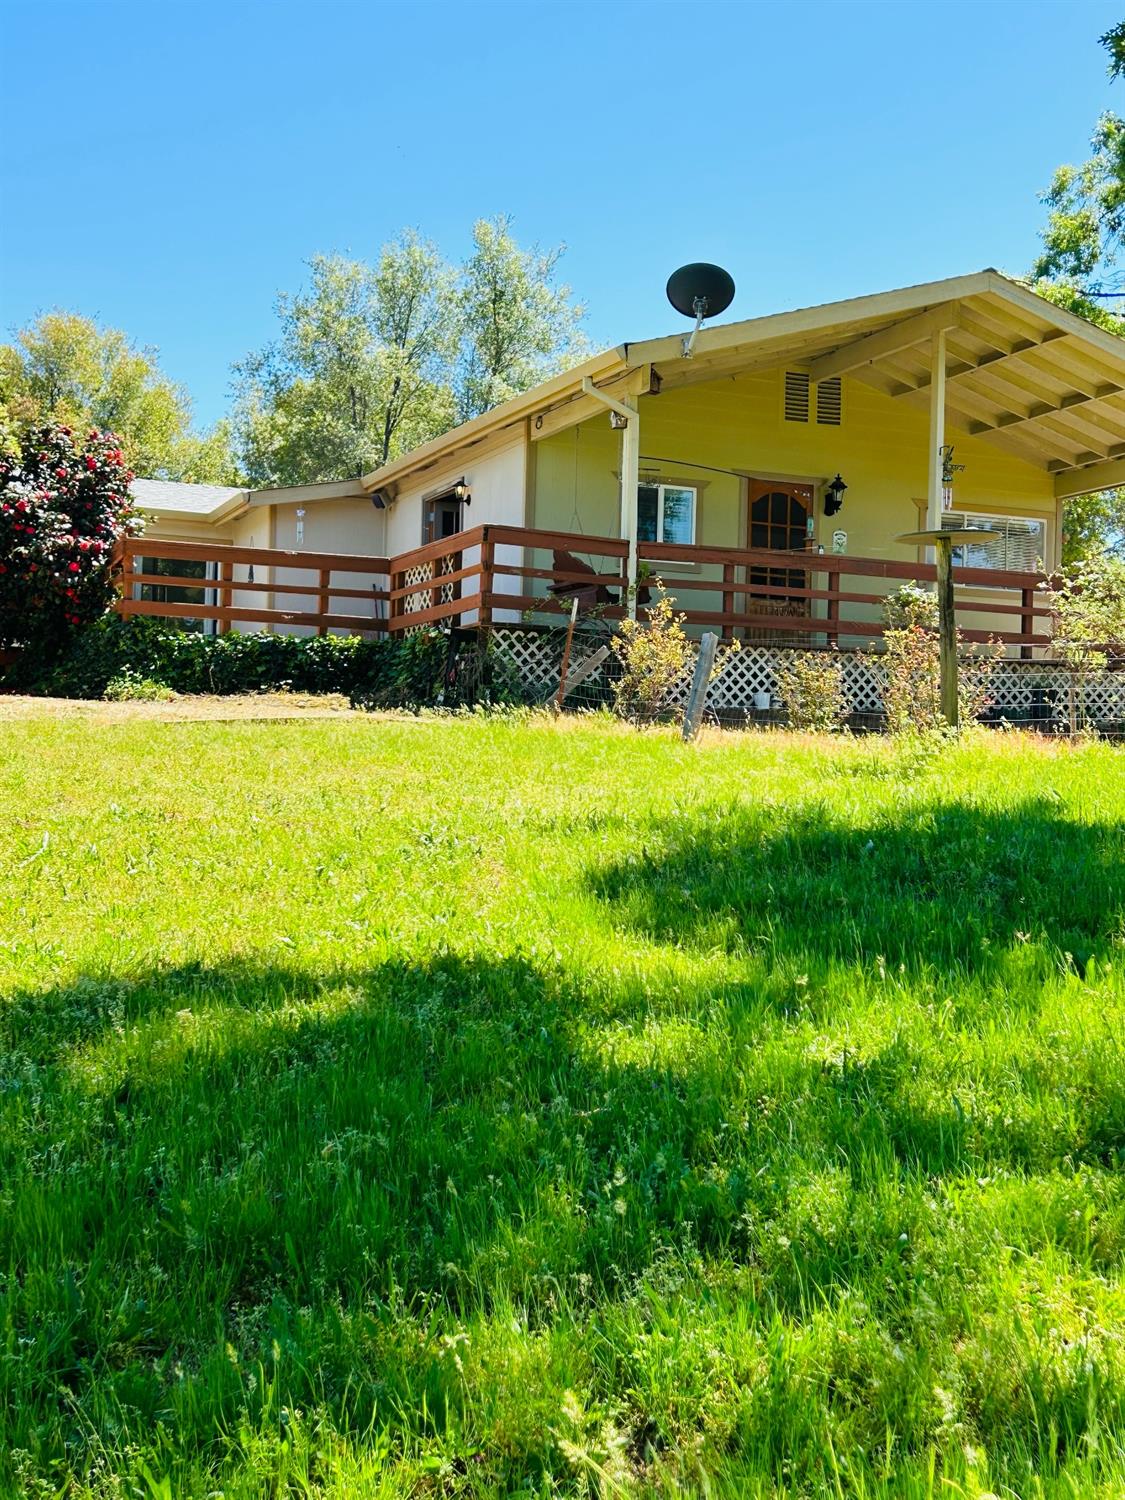 Photo of 4652 Sand Ridge Rd in Placerville, CA